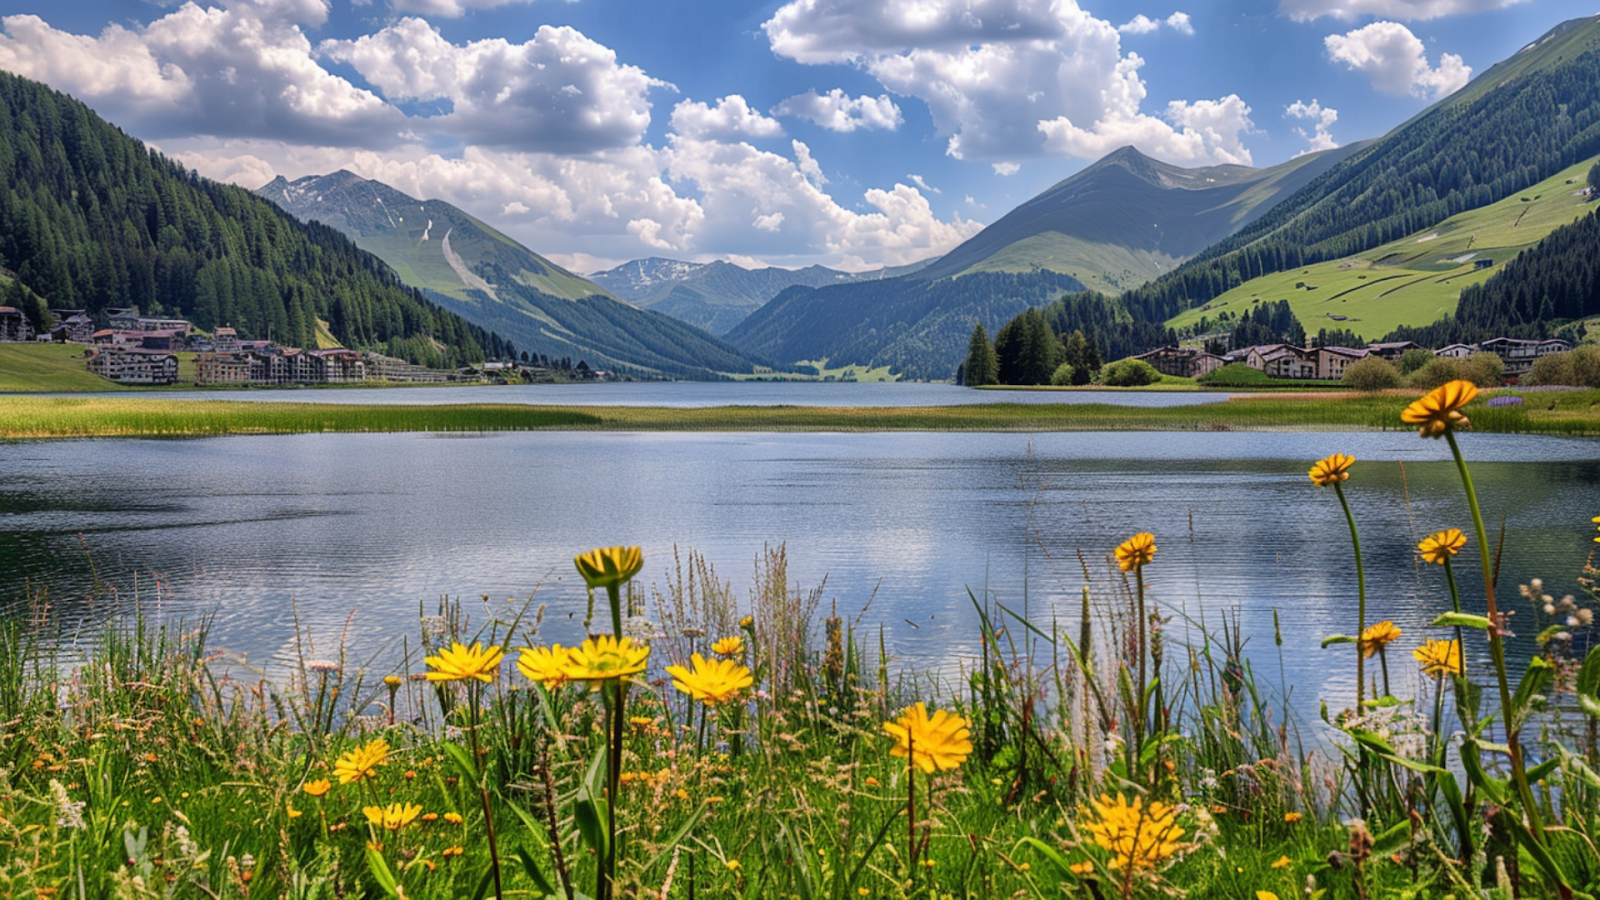 The lake in Davos Dorf with the Swiss mountains in the background